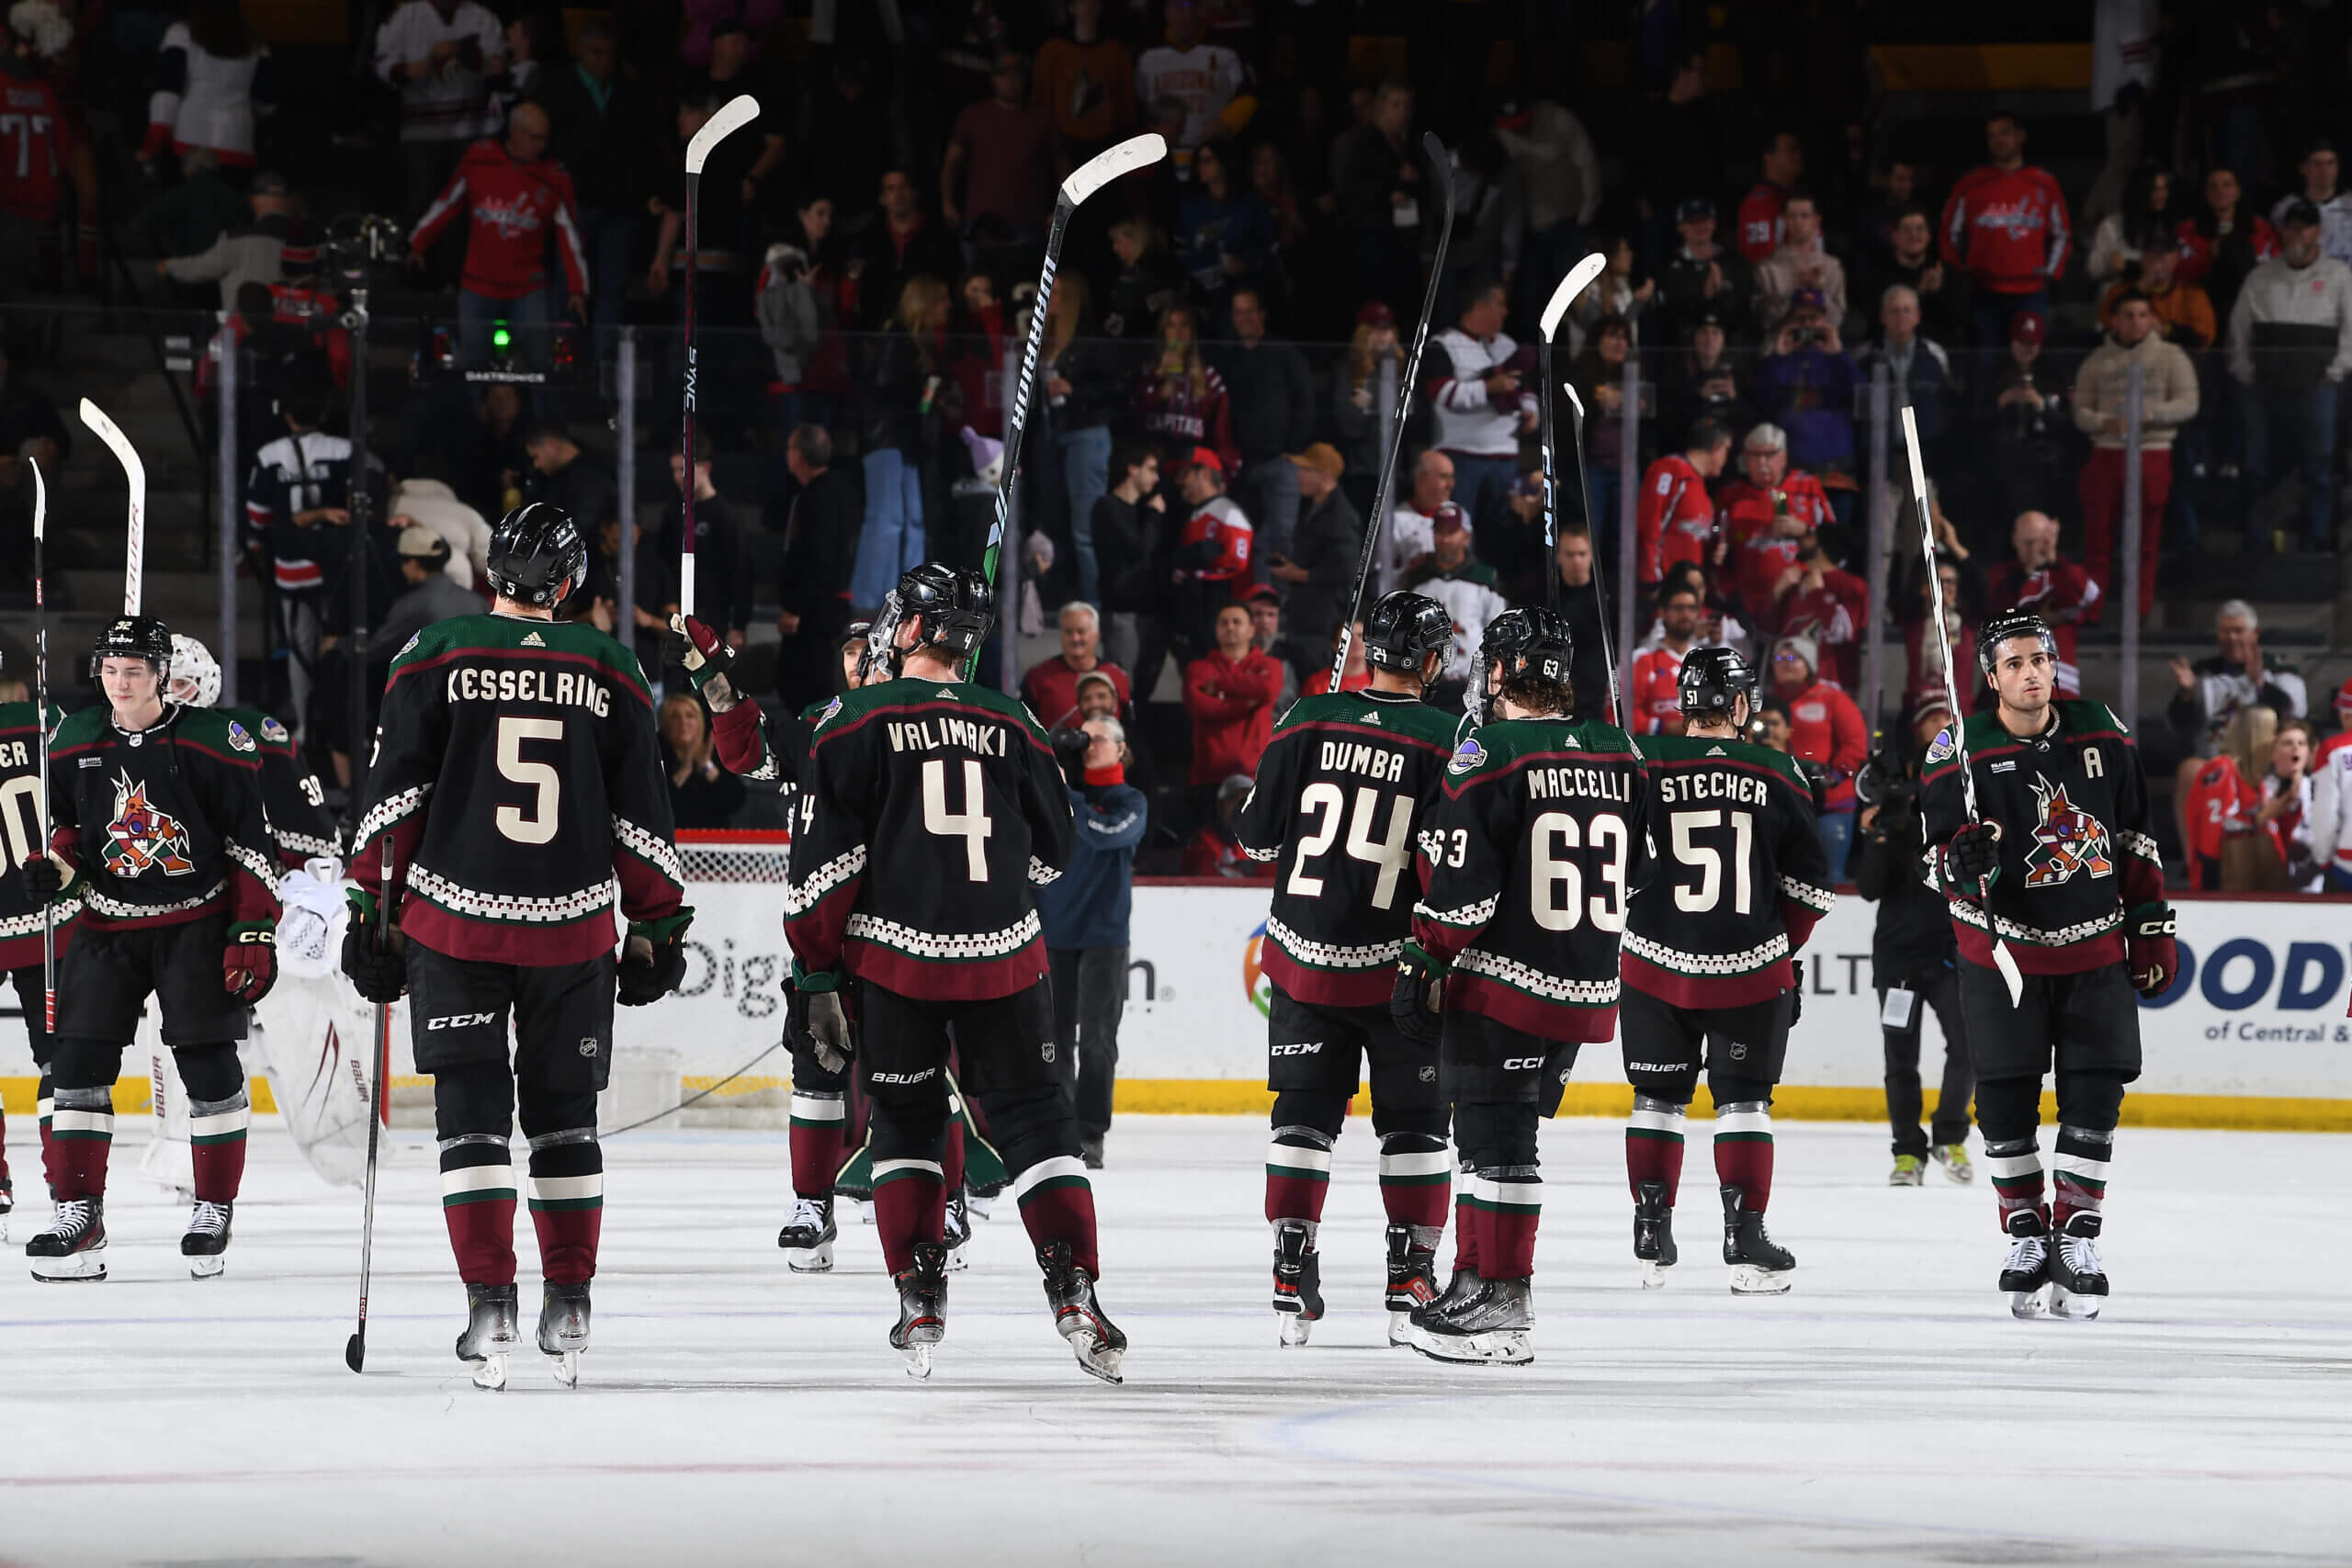 Resignation reigns as Coyotes brace for